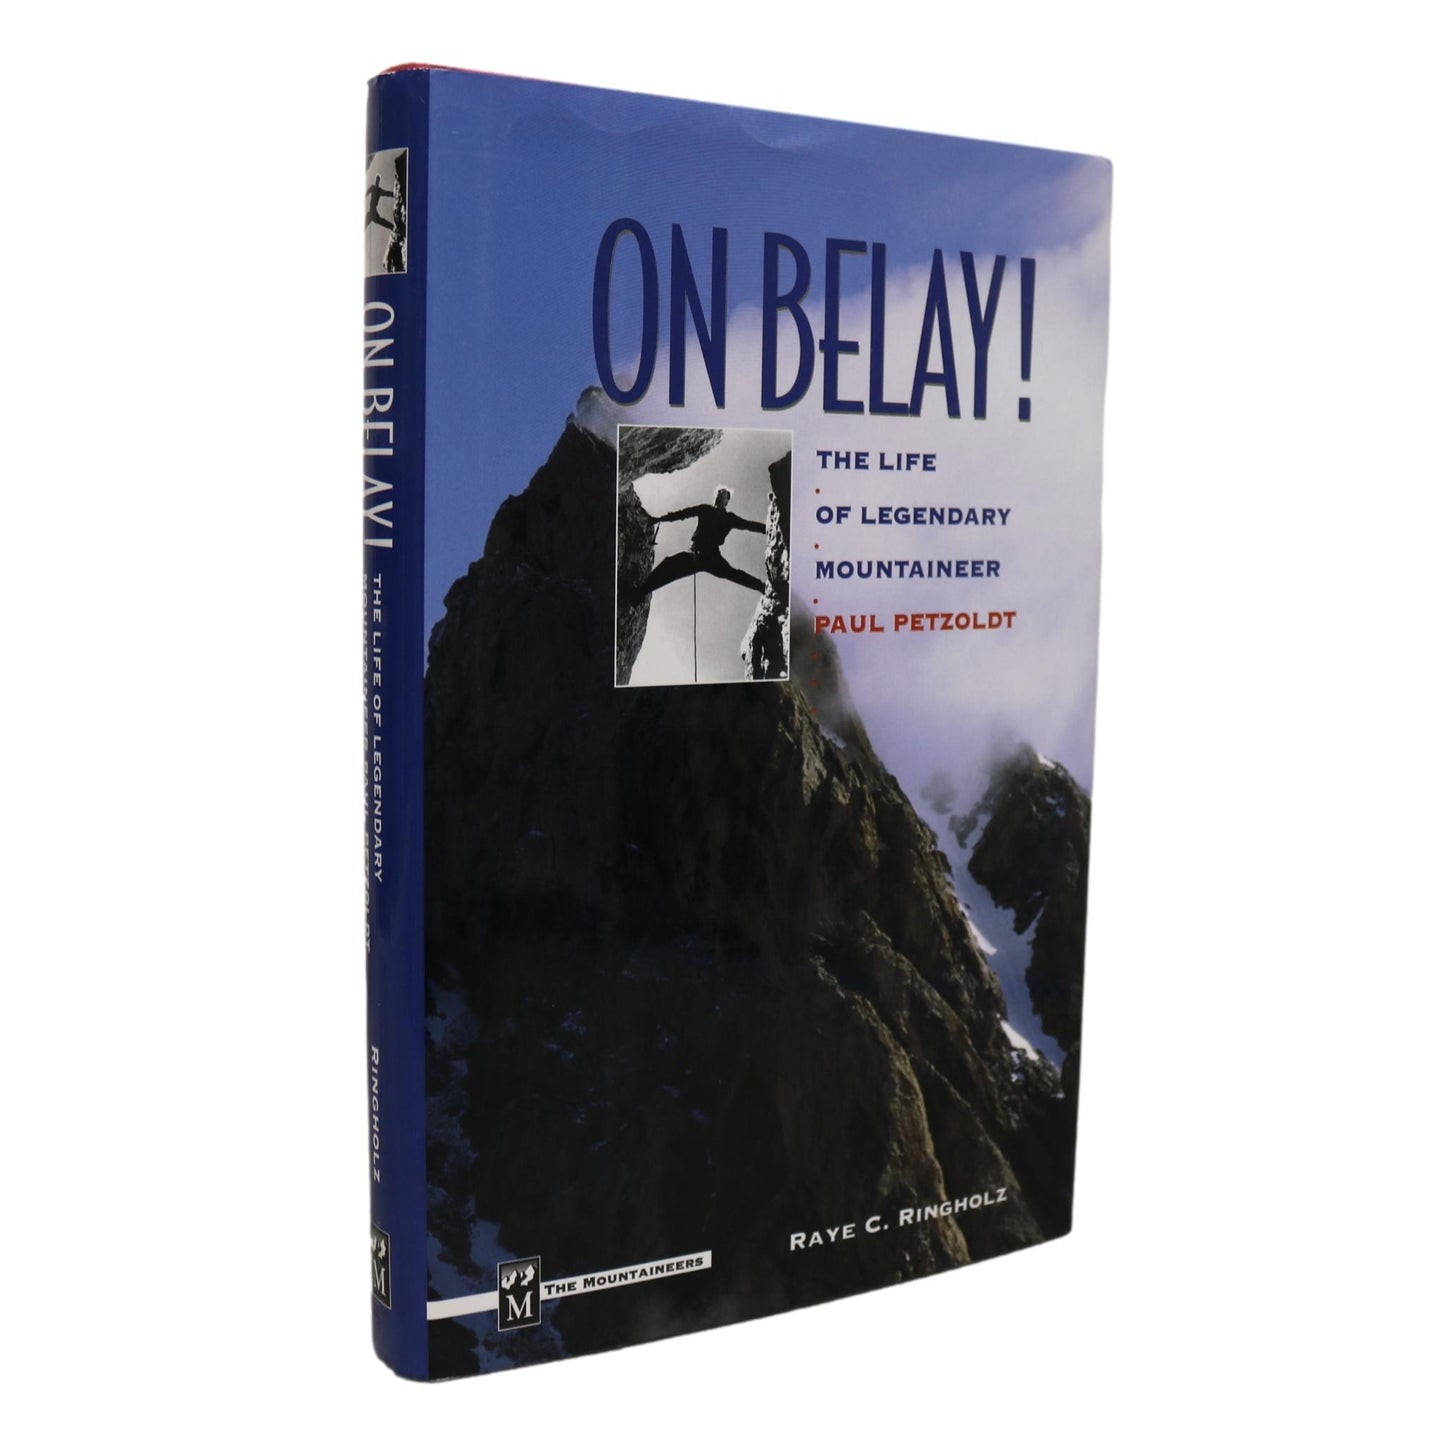 On Belay Paul Petzoldt Climber Climbing Mountaineering Biography Used Book